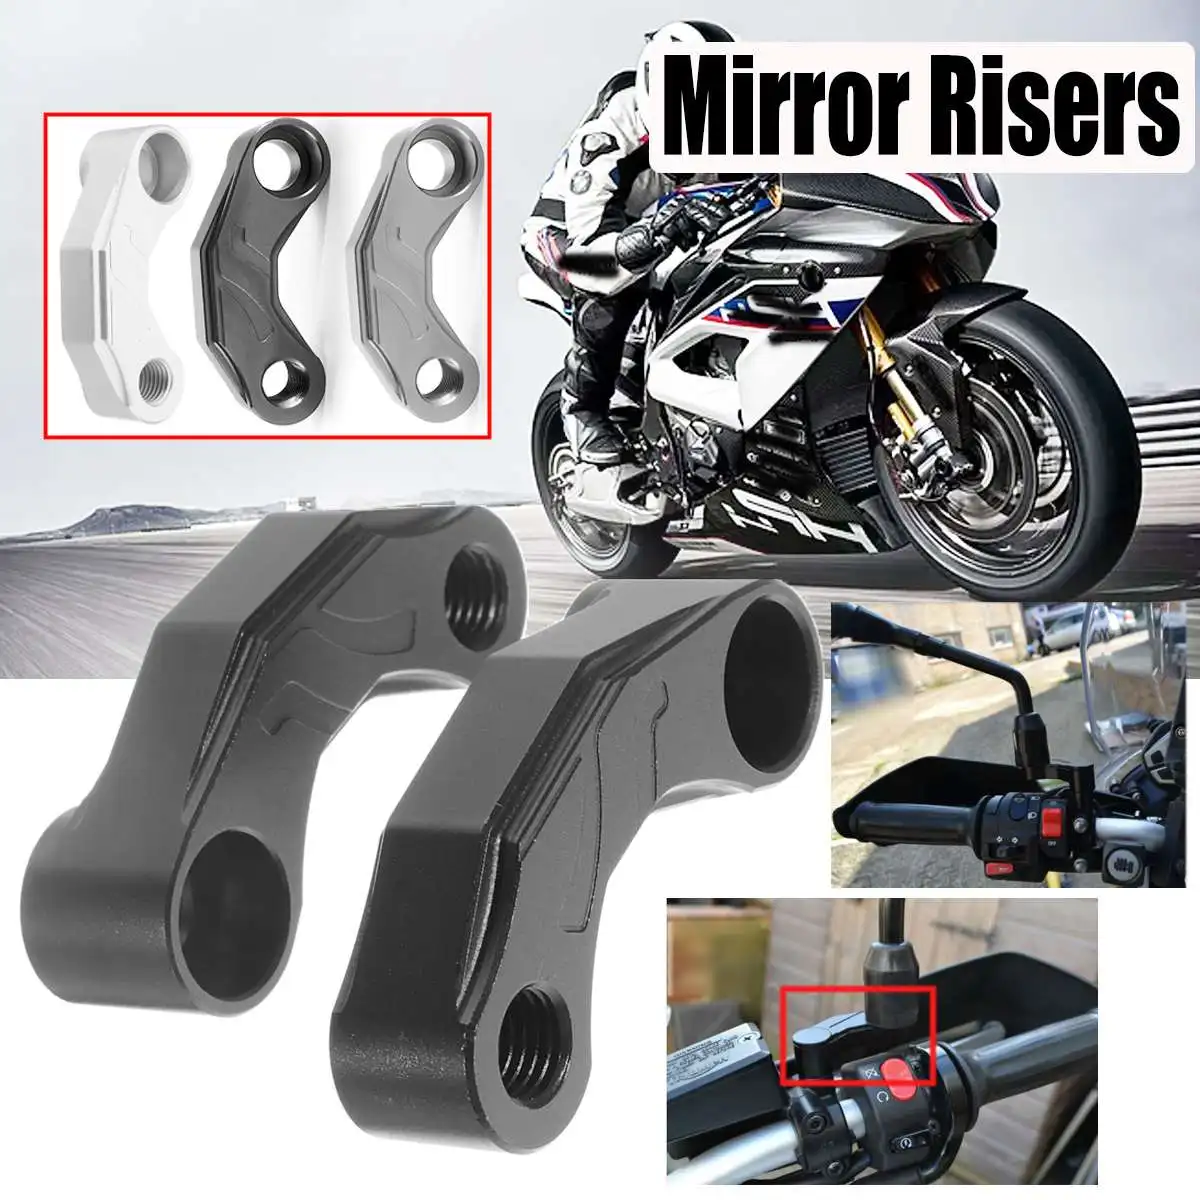 Rearview Mirror Extender 10mm 8mm Aluminum Alloy Motorcycle Rearview Mirror Adapter Kit Riser Mount Extender with M10 or M8 mounting apertures.for Motorcycles Electric Vehicles